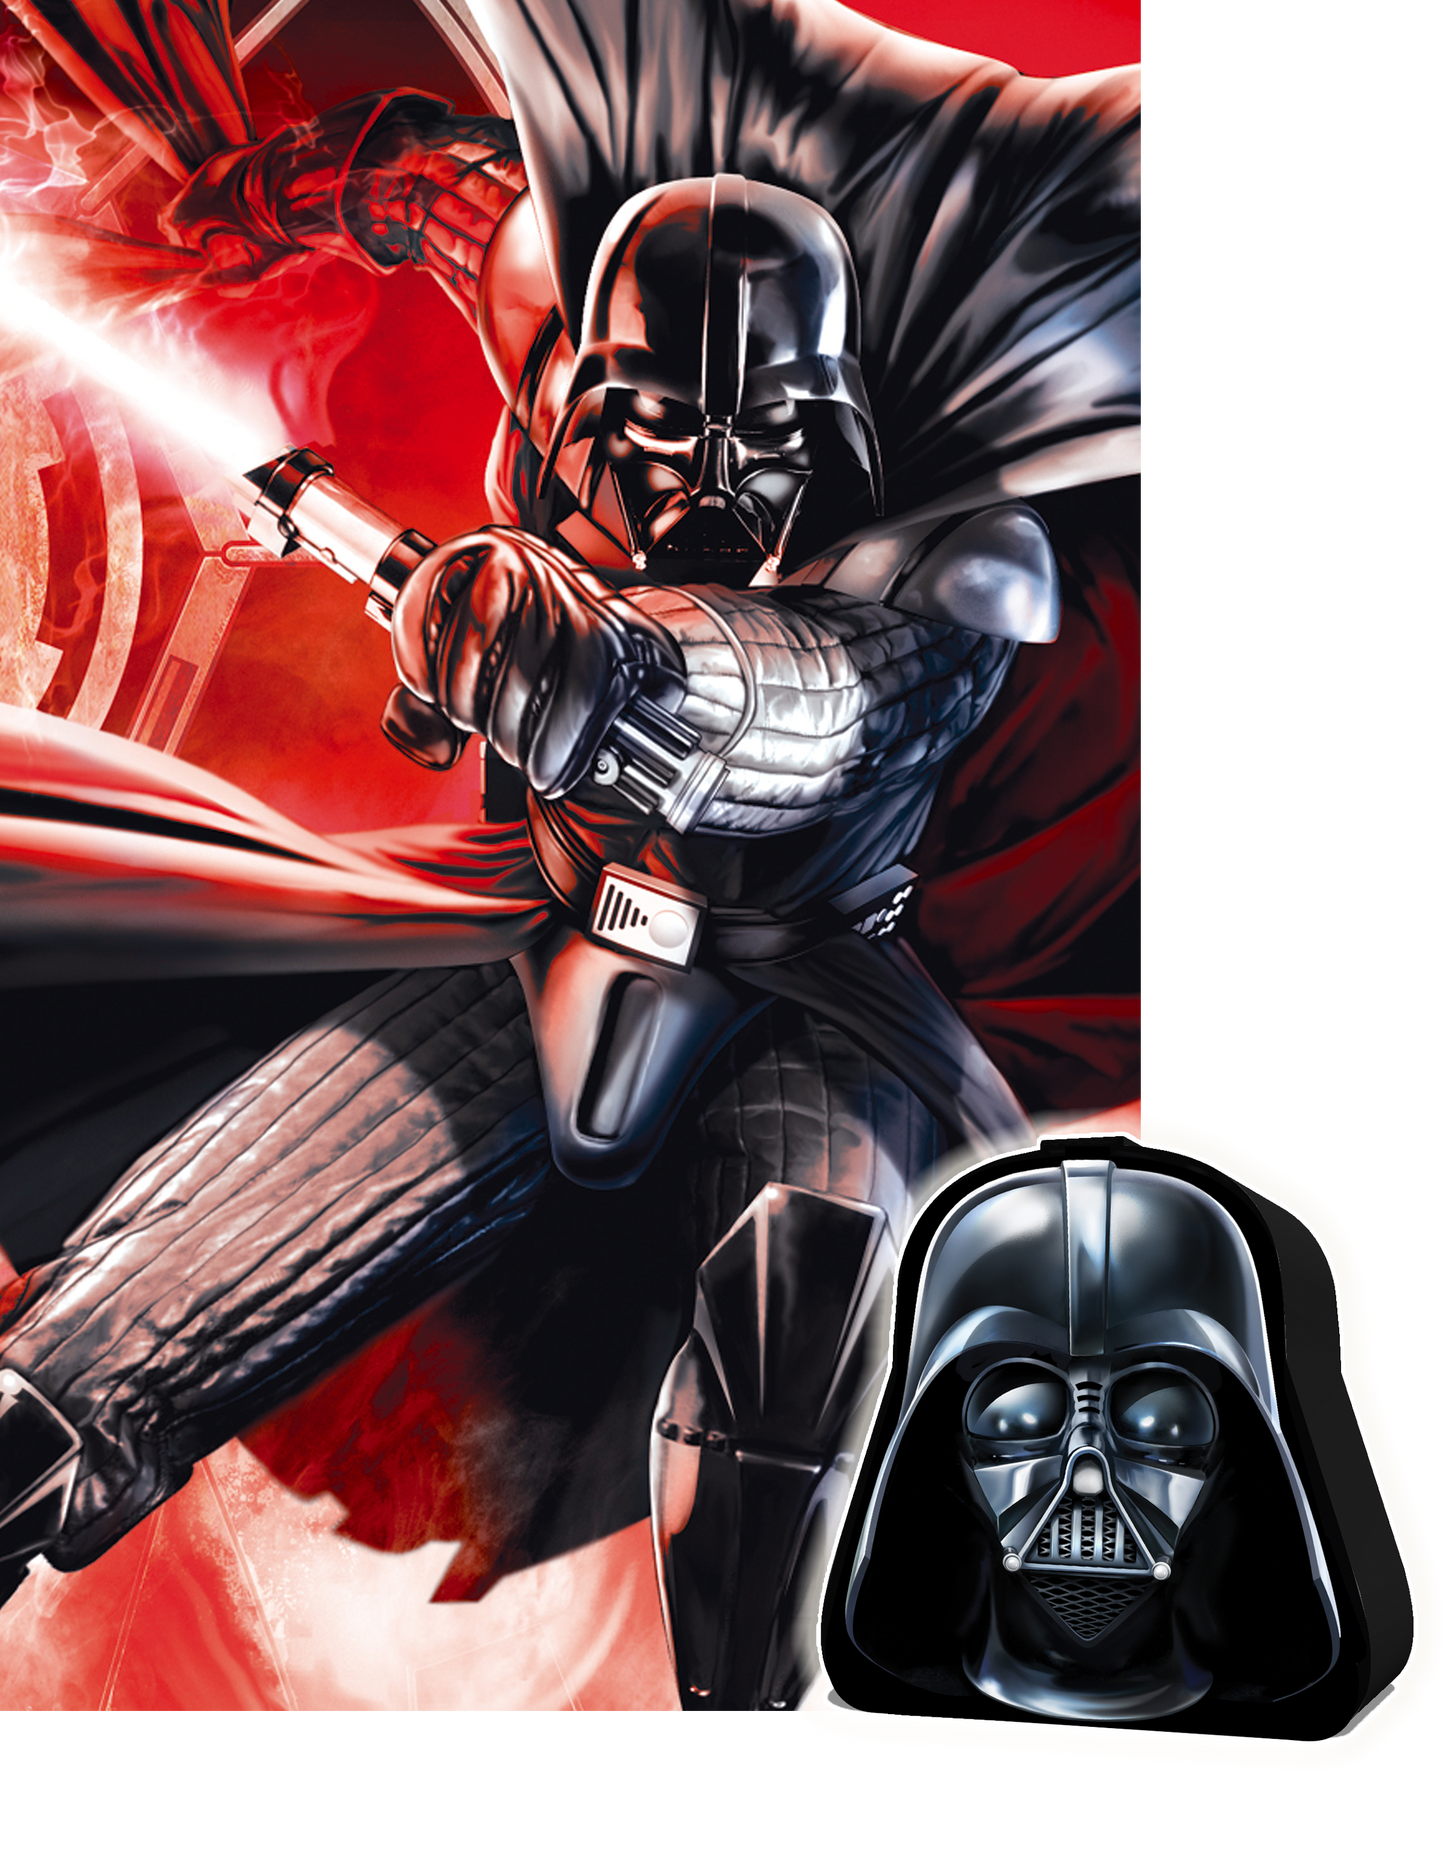 Star Wars - Darth Vader 3D Jigsaw Puzzle in Tin Box Packaging 35577 300pc 12x18"